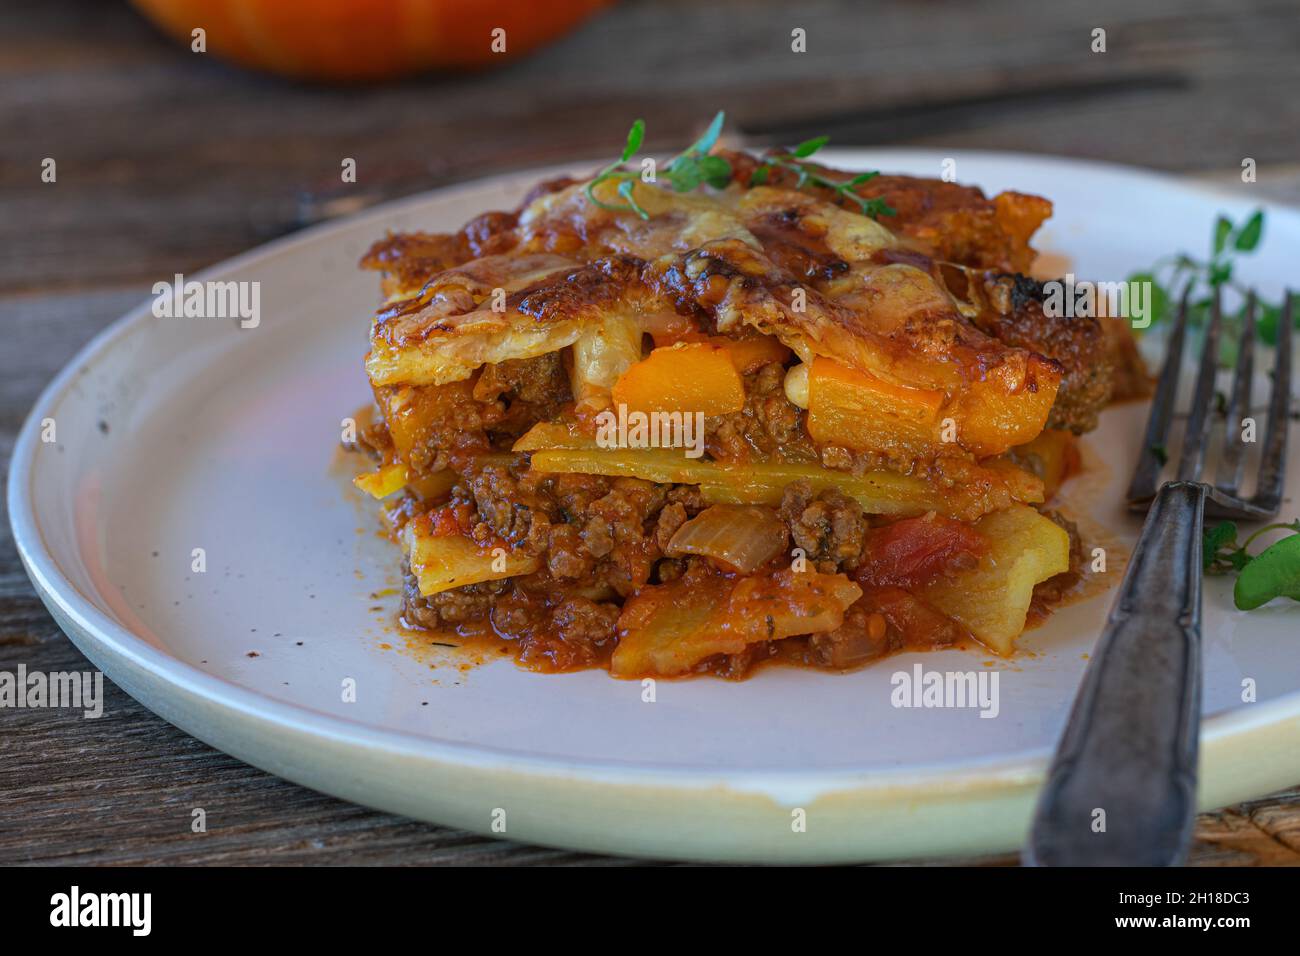 gluten free casserole dish with ground beef, potatoes and hokkaido pumpkin. Topped with melted mozzarella cheese and served on plate with fork Stock Photo